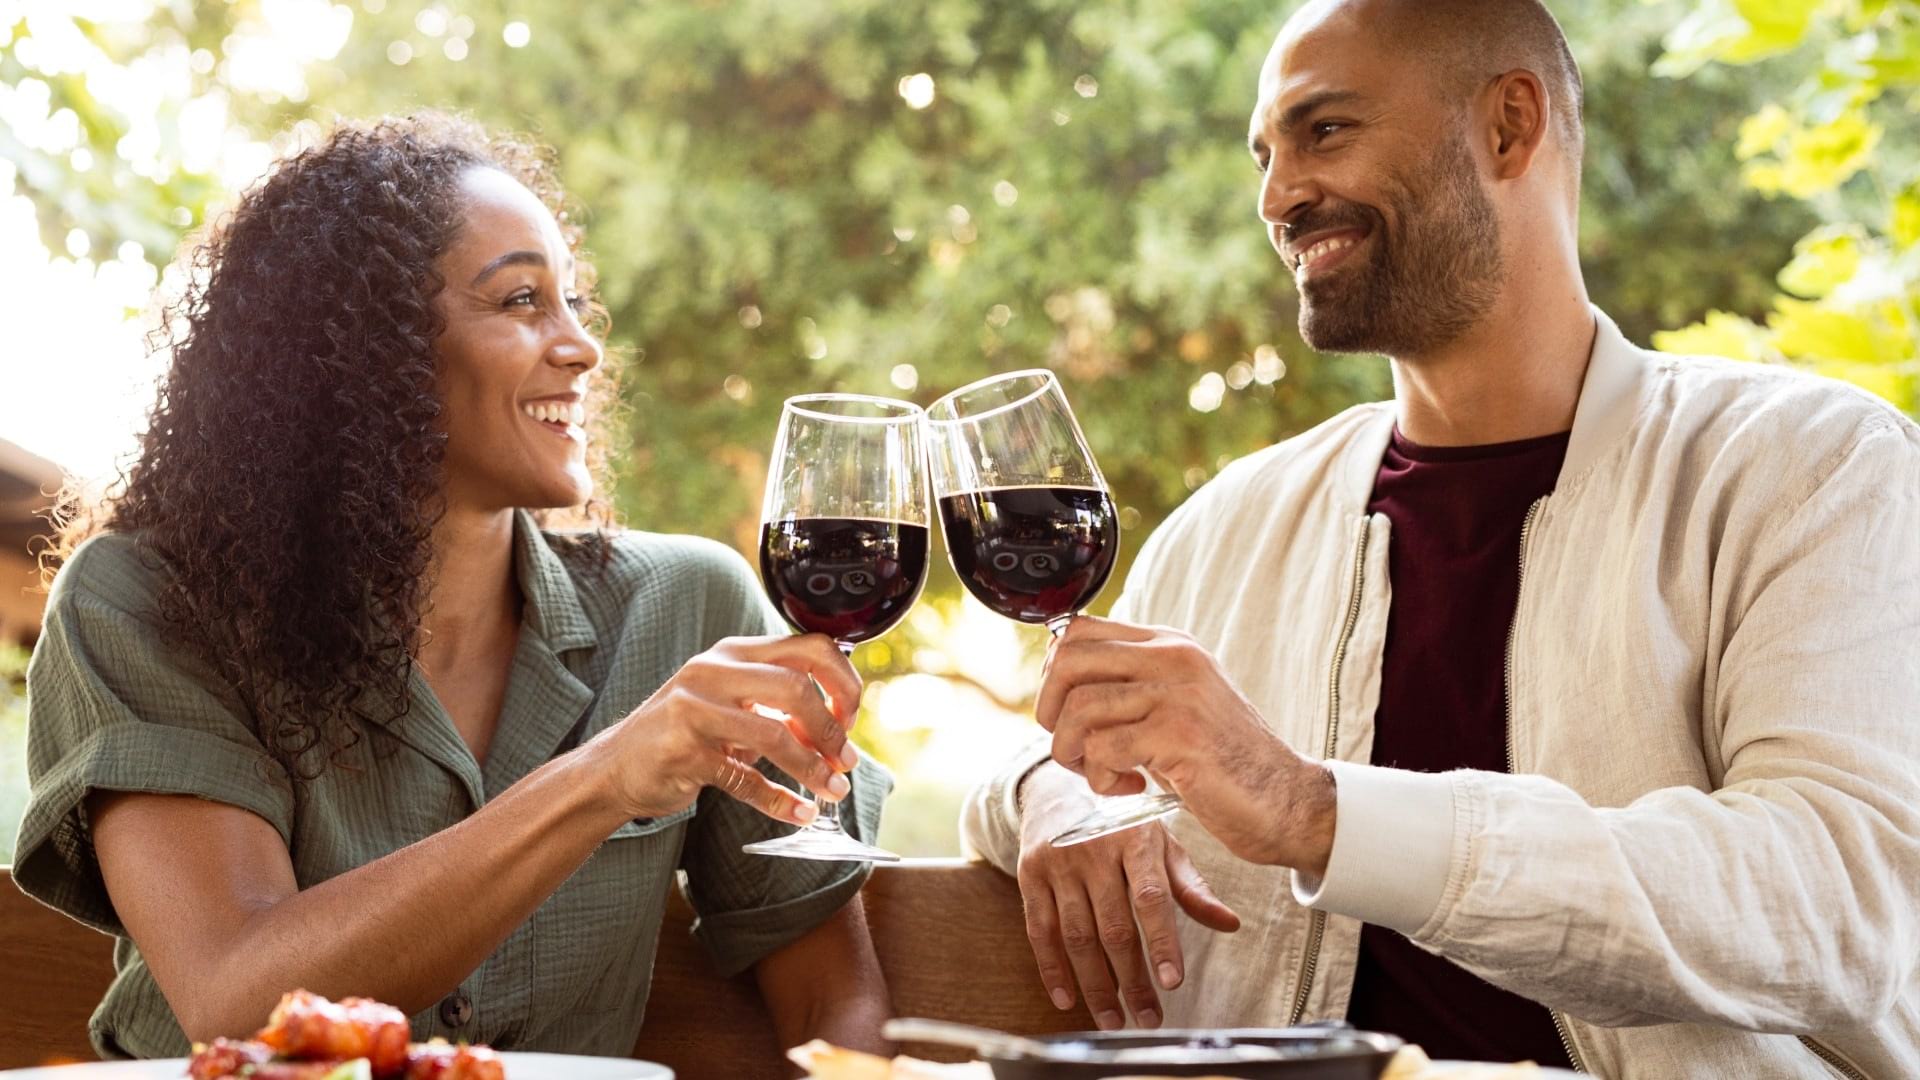 two people celebrating an occasion with wine glasses and in an outdoor area